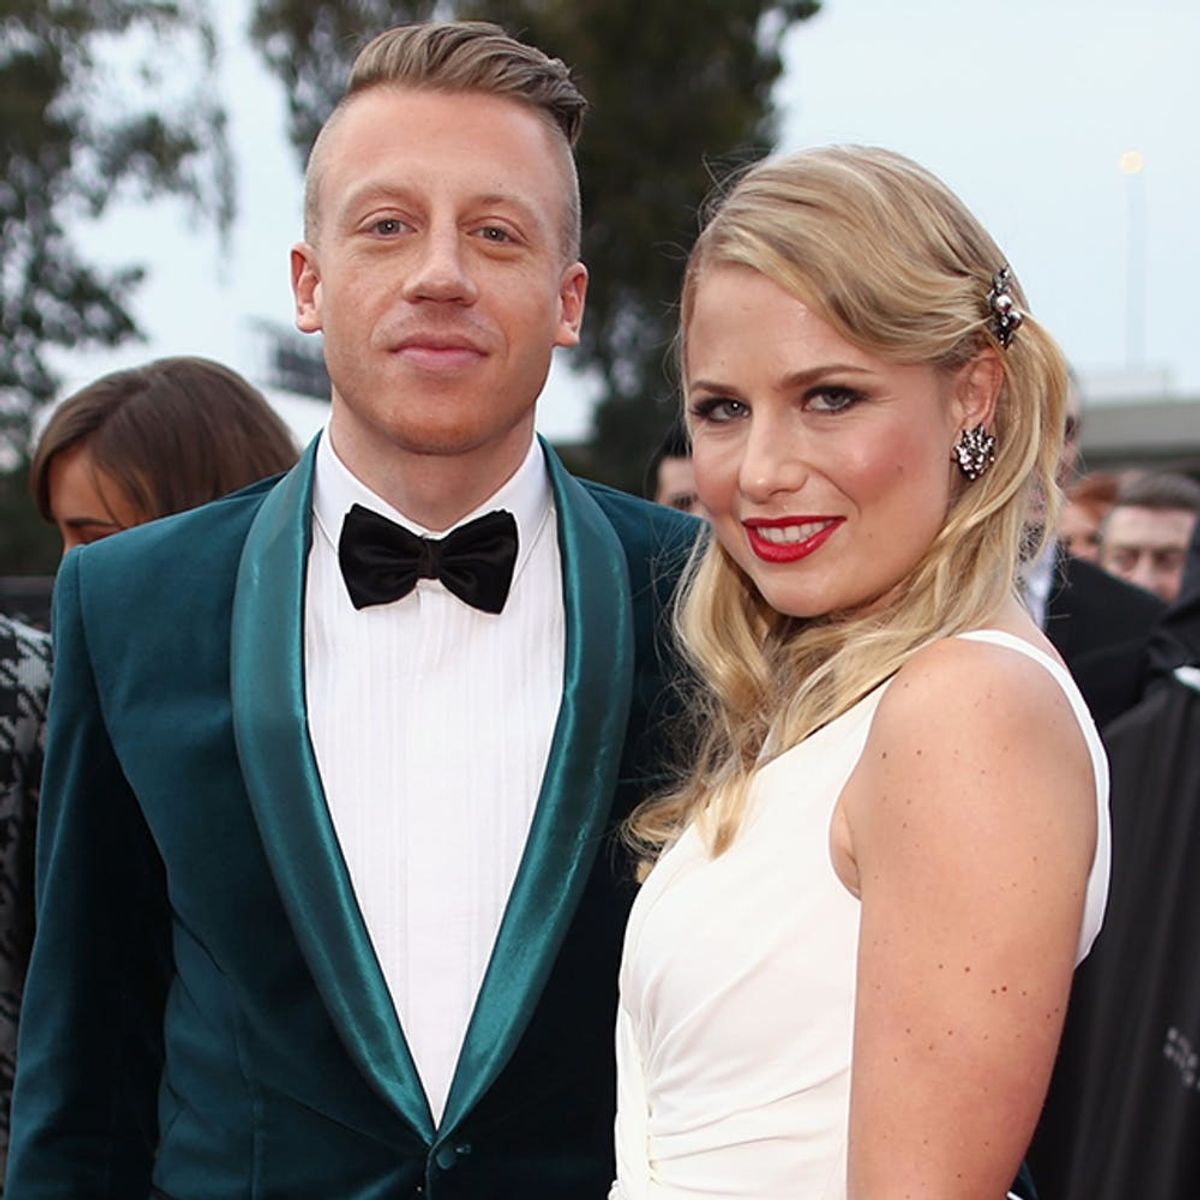 Macklemore Just Revealed His Baby’s Name in a Super Creative Way